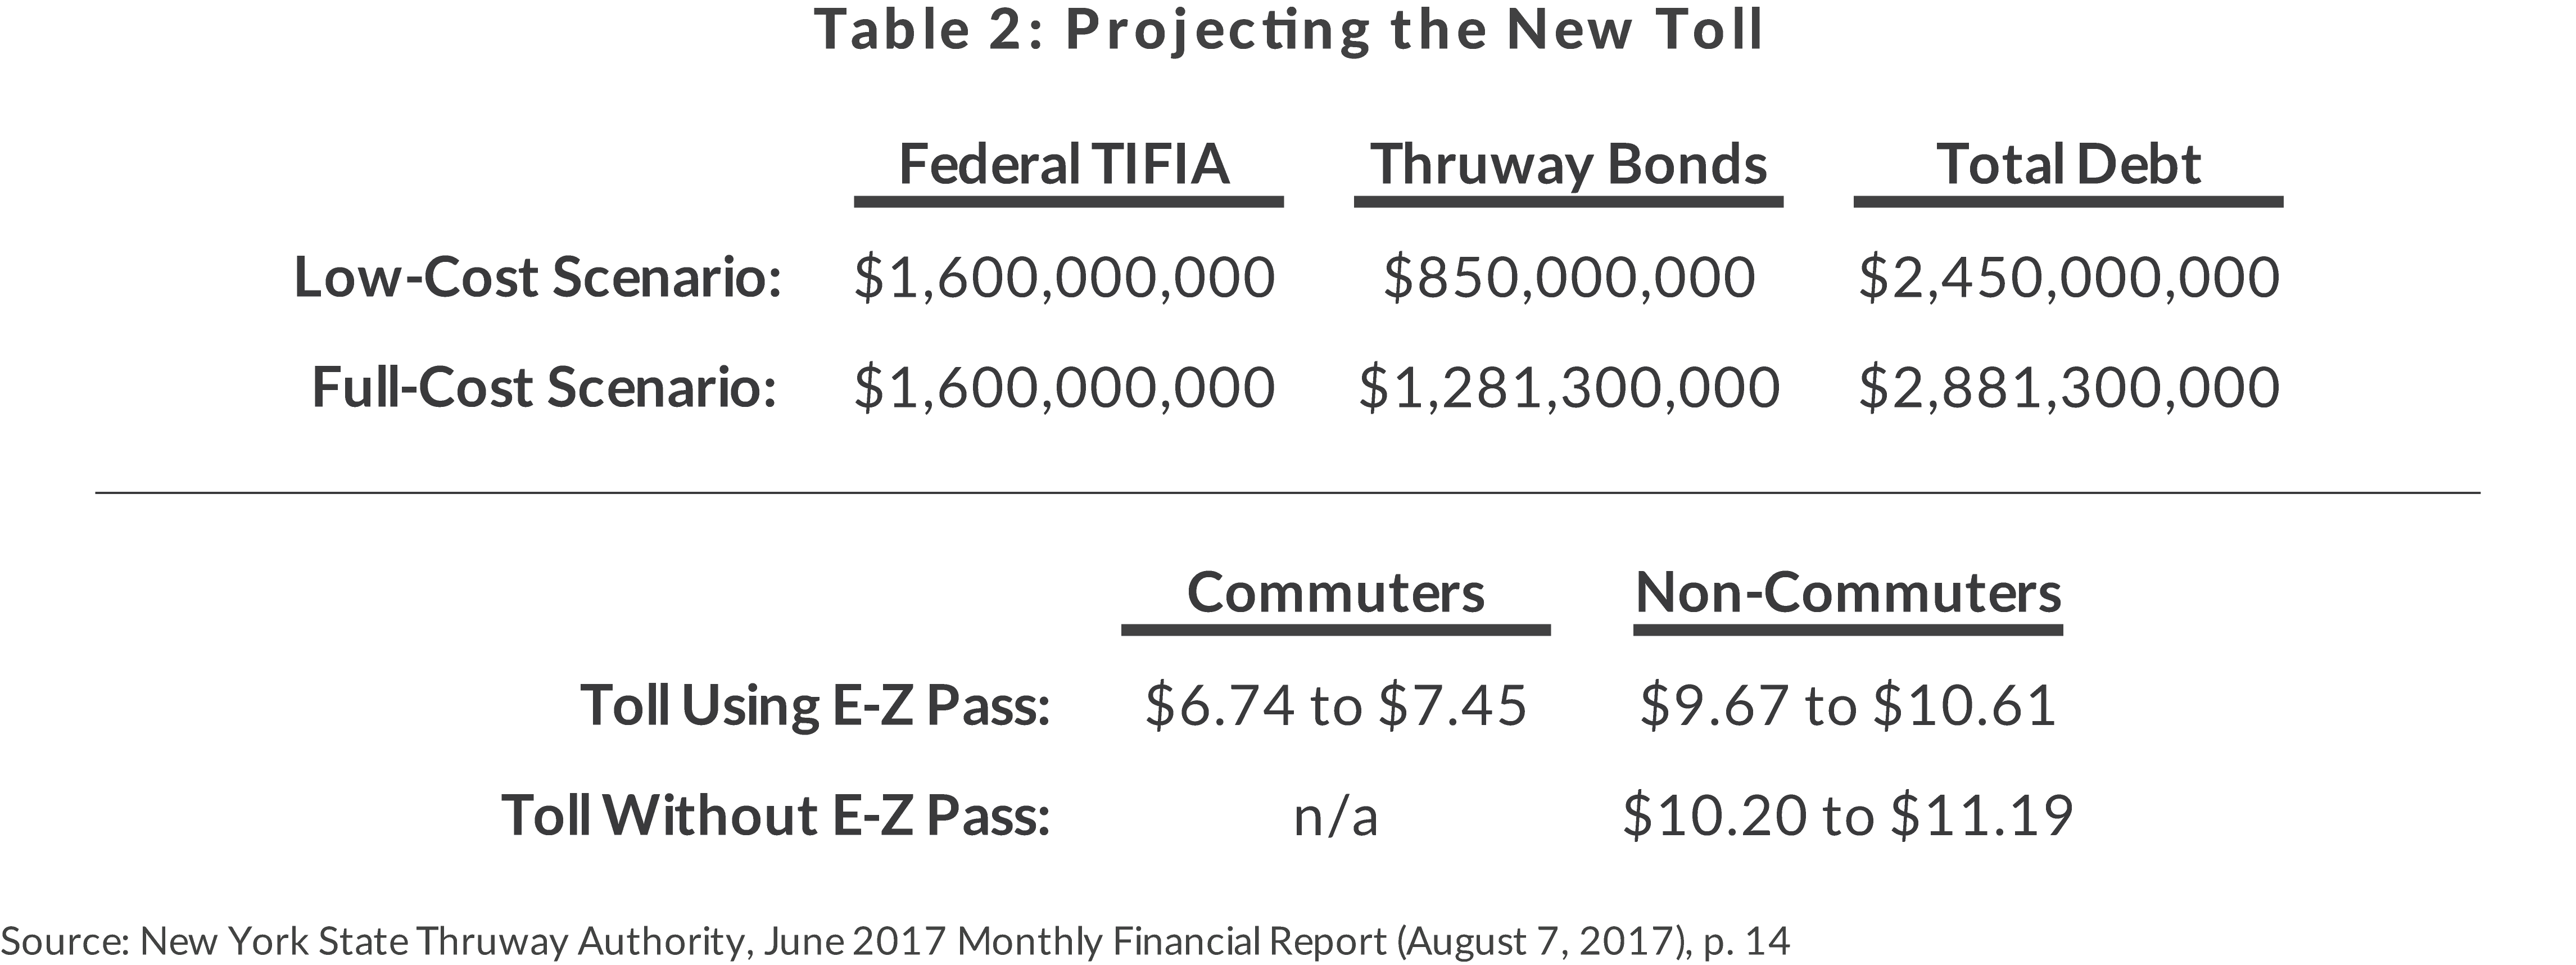 Table 2: Projection of a New Toll on Mario M. Cuomo Bridge